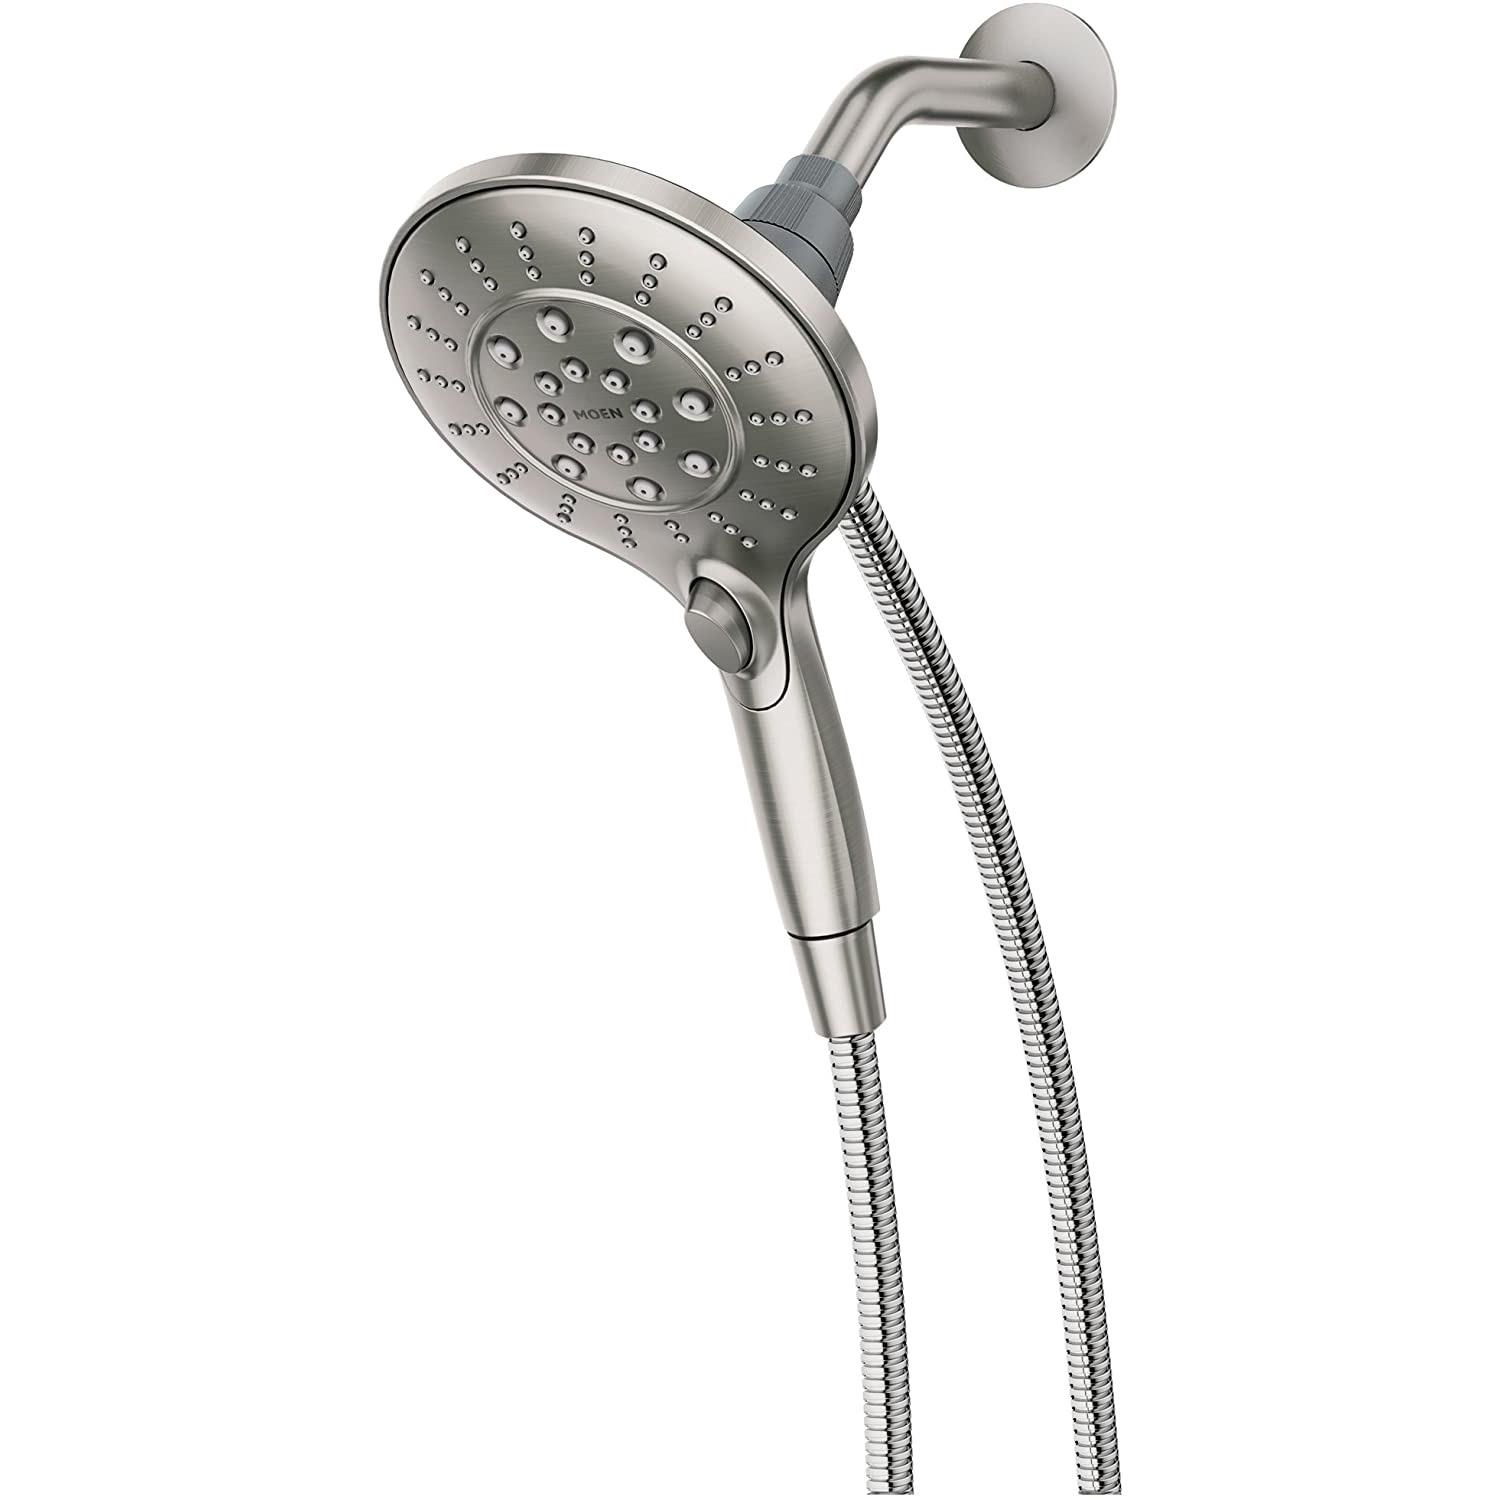 Moen Engage Magnetix Six-Function 5.5in Handheld Showerhead for $32.99 Shipped